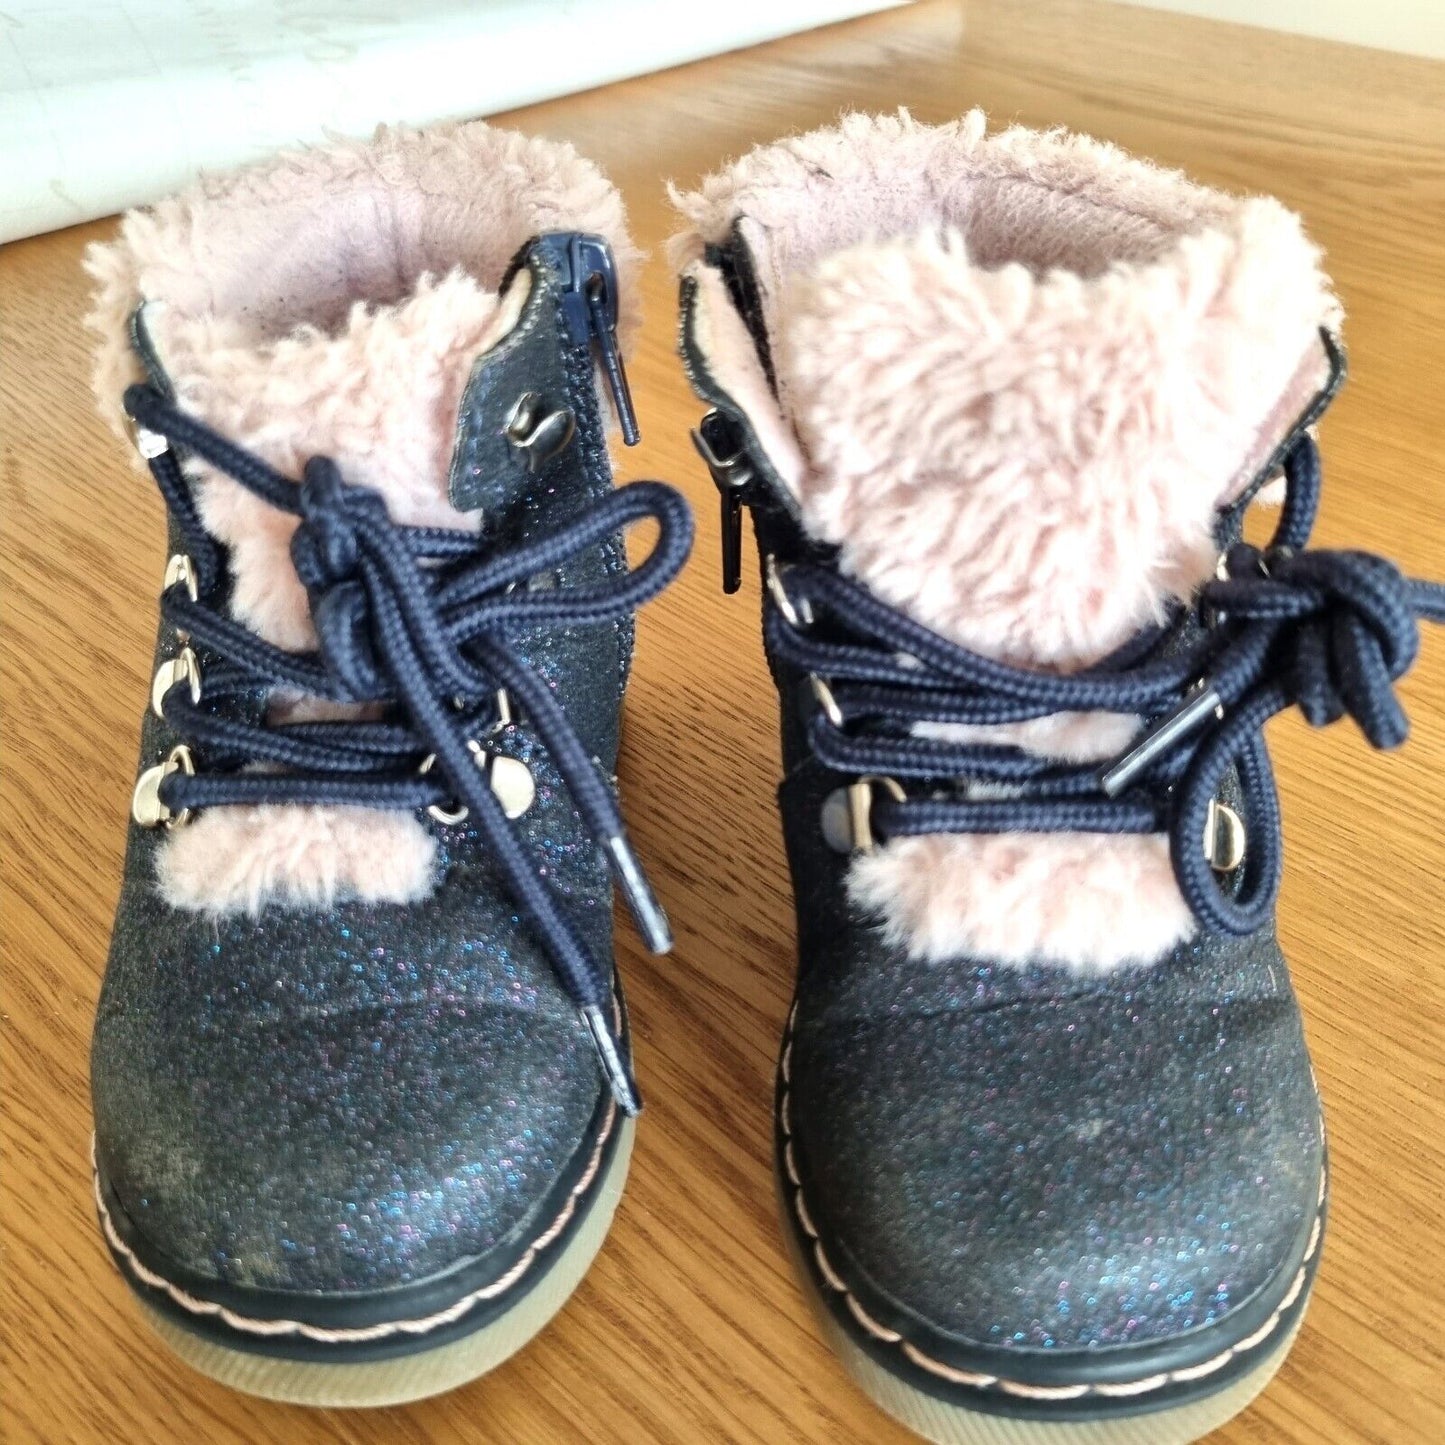 Cup Cake Couture Girls Kids Boots Sparkling Fur Tops Lined Lace Ups Size 21 - Bonnie Lassio